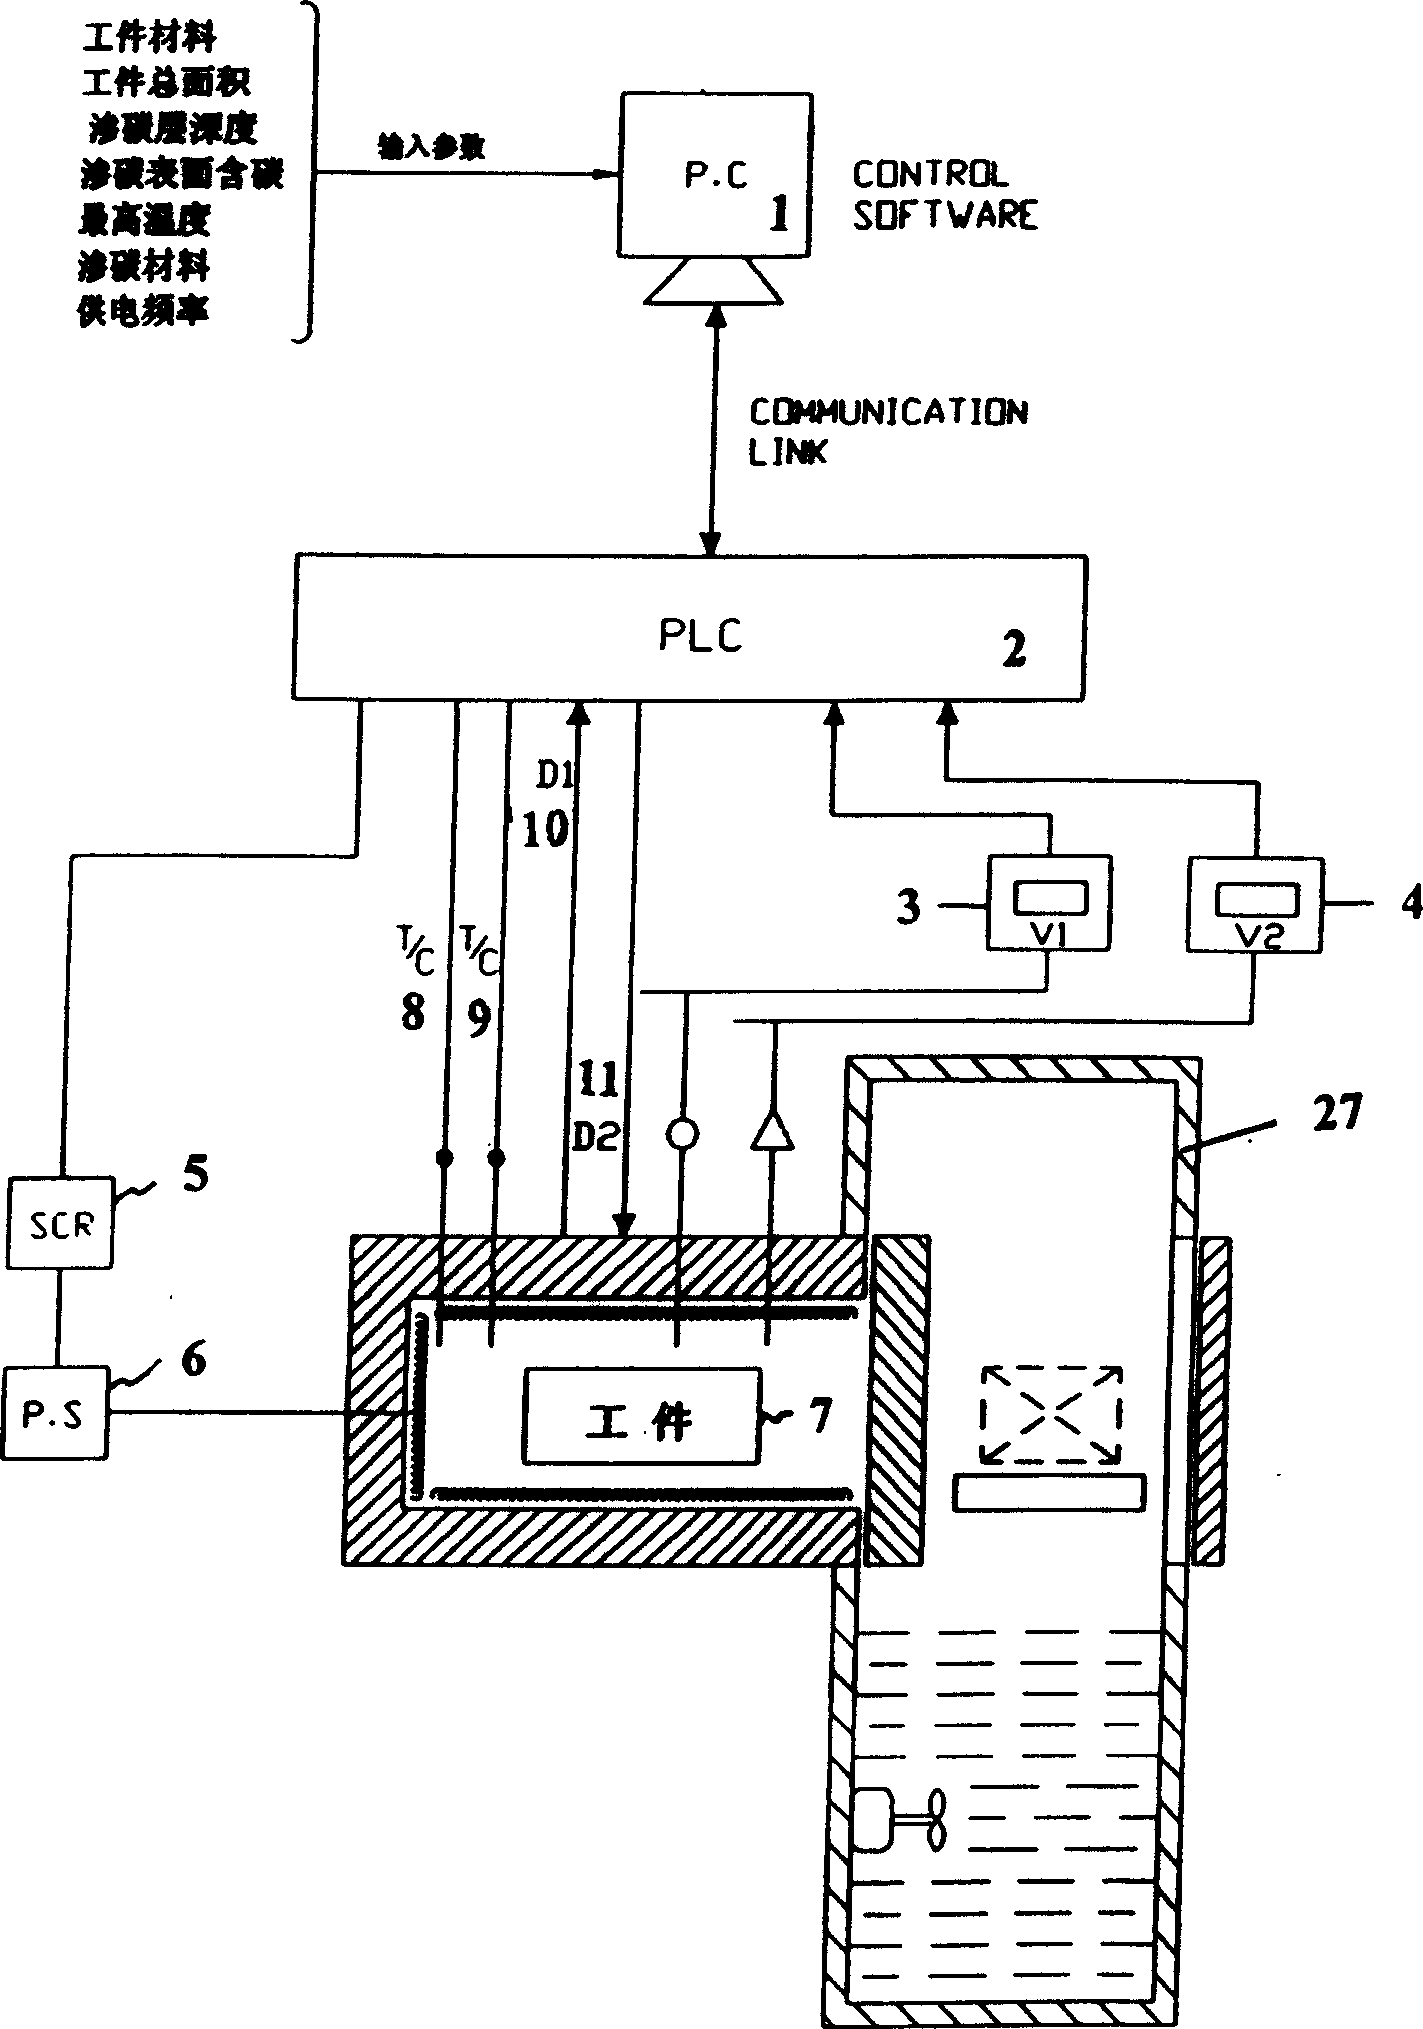 Dynamic control system for low-pressure carburating heat treament furnace